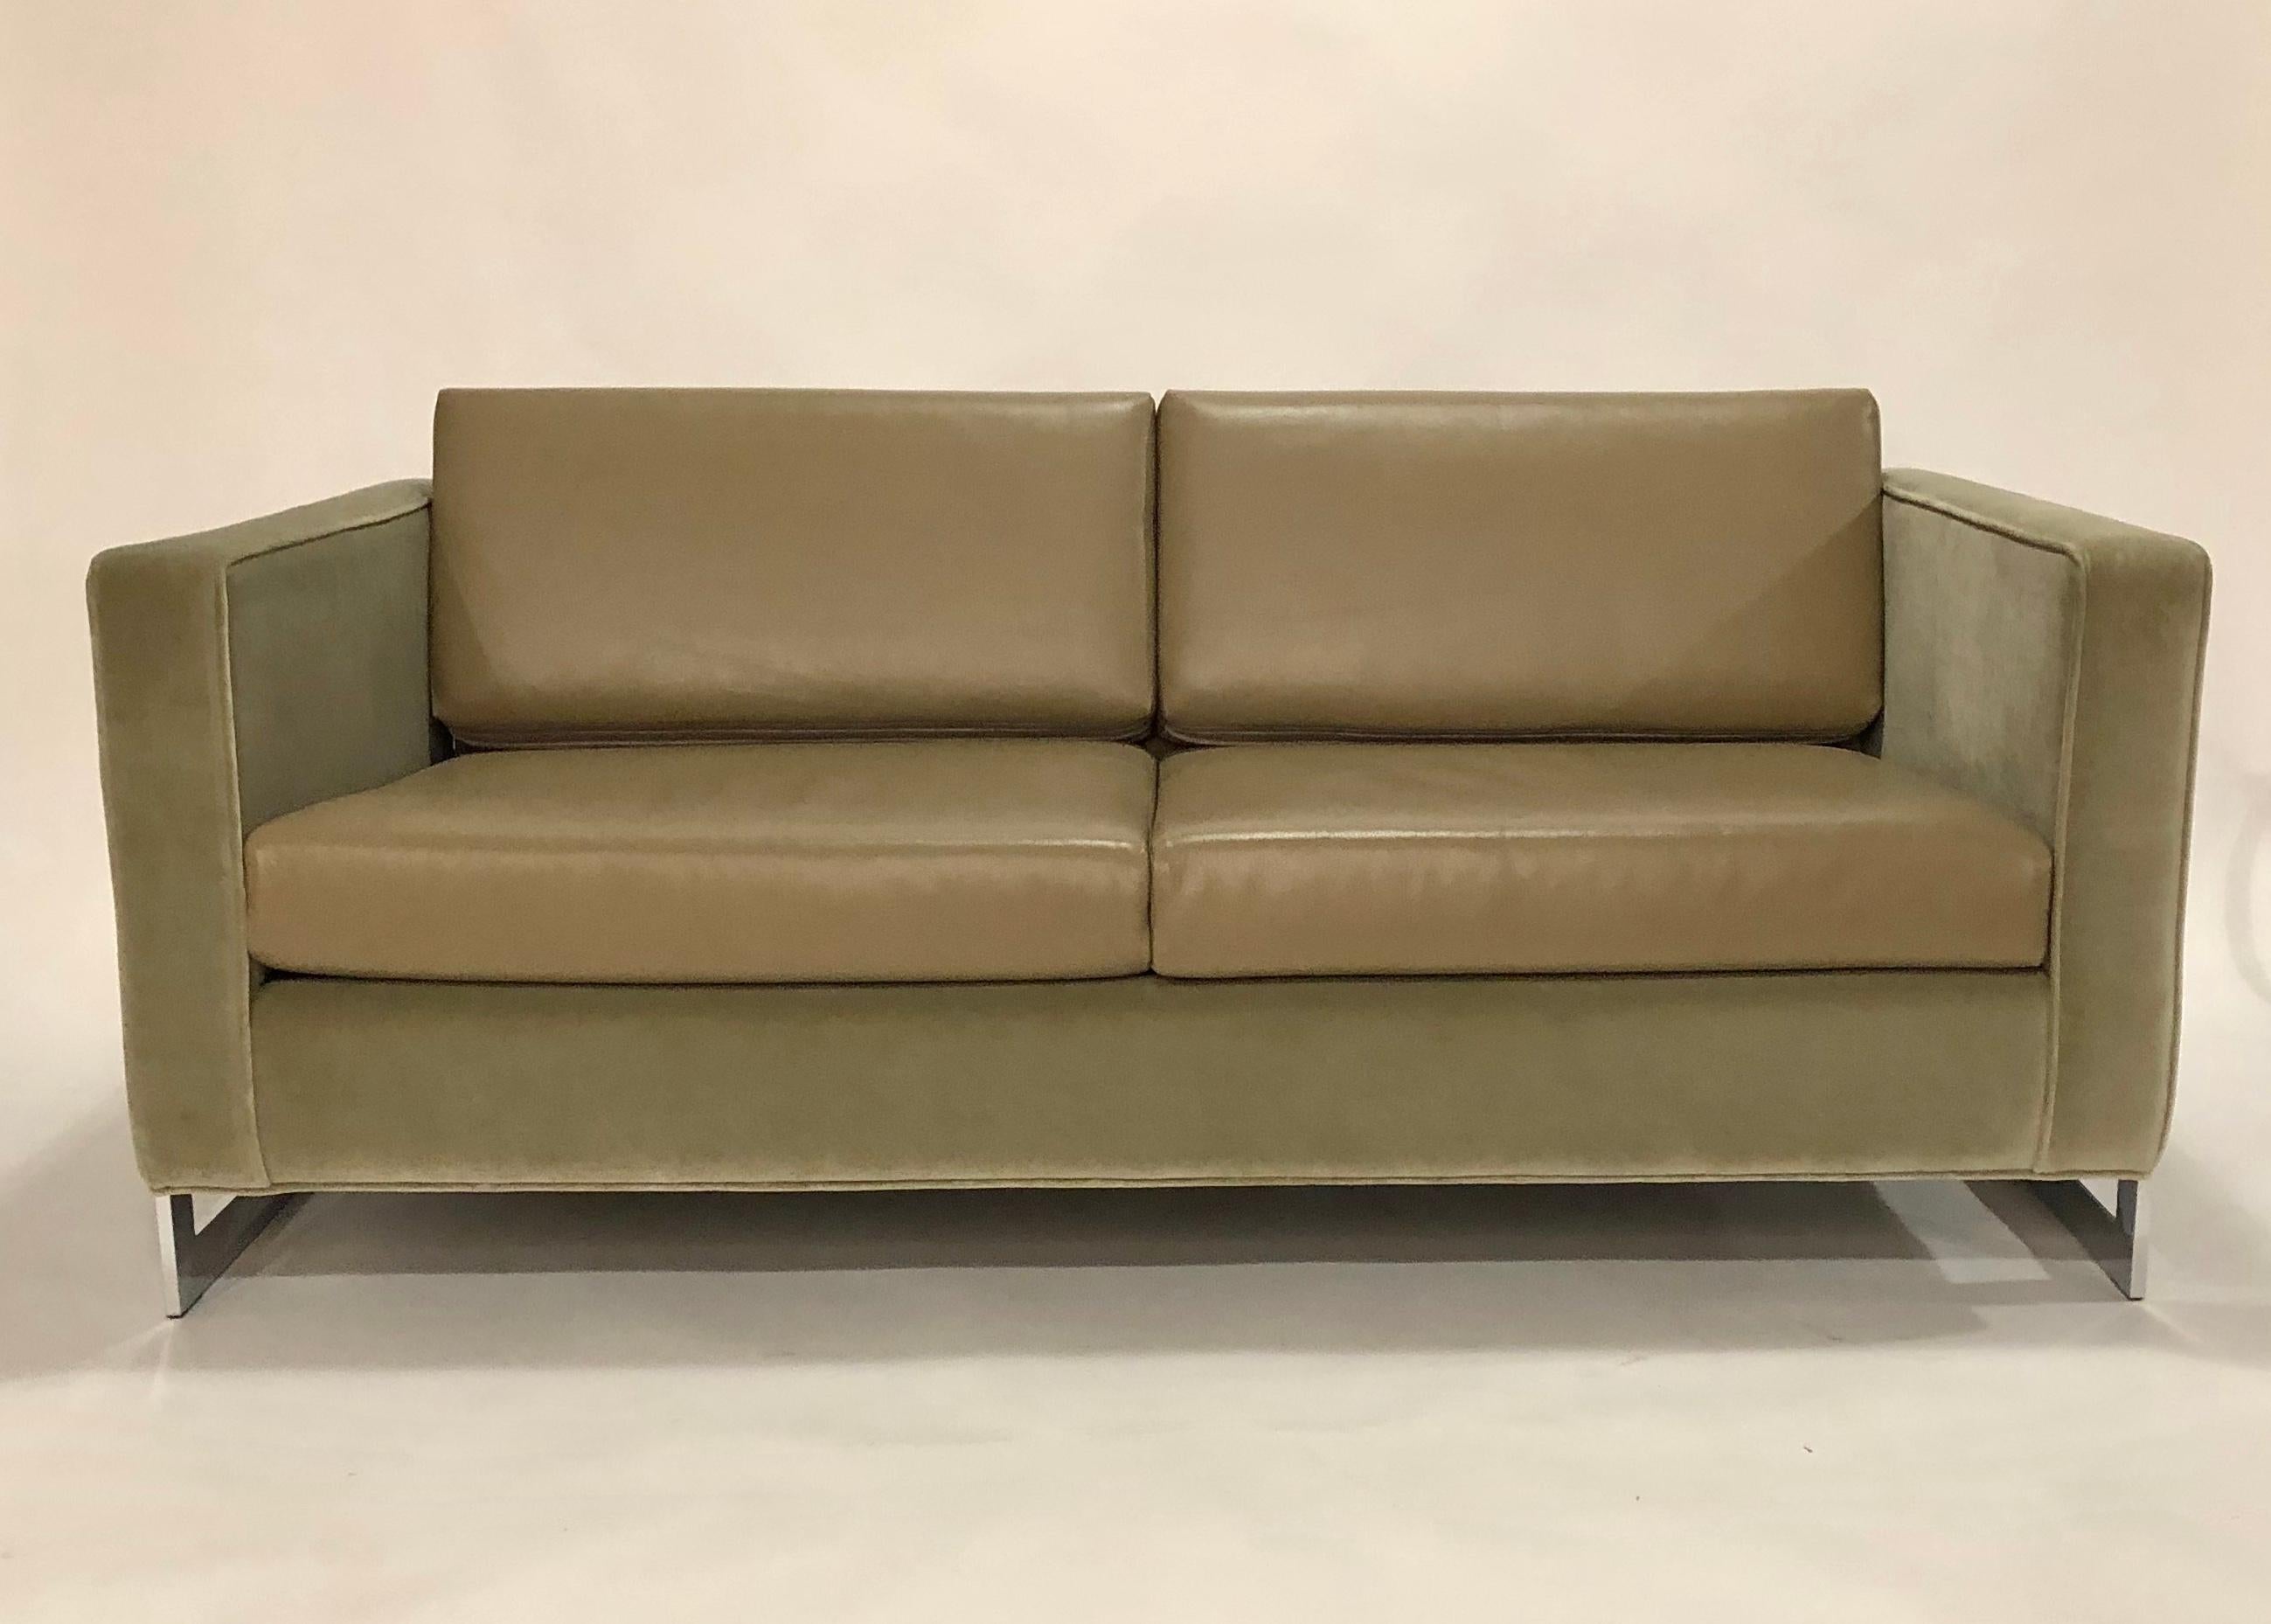 Milo Baughman cantilevered love seat sofa for Thayer Coggin reupholstered in a mushroom color velvet and matching color leather cushions.